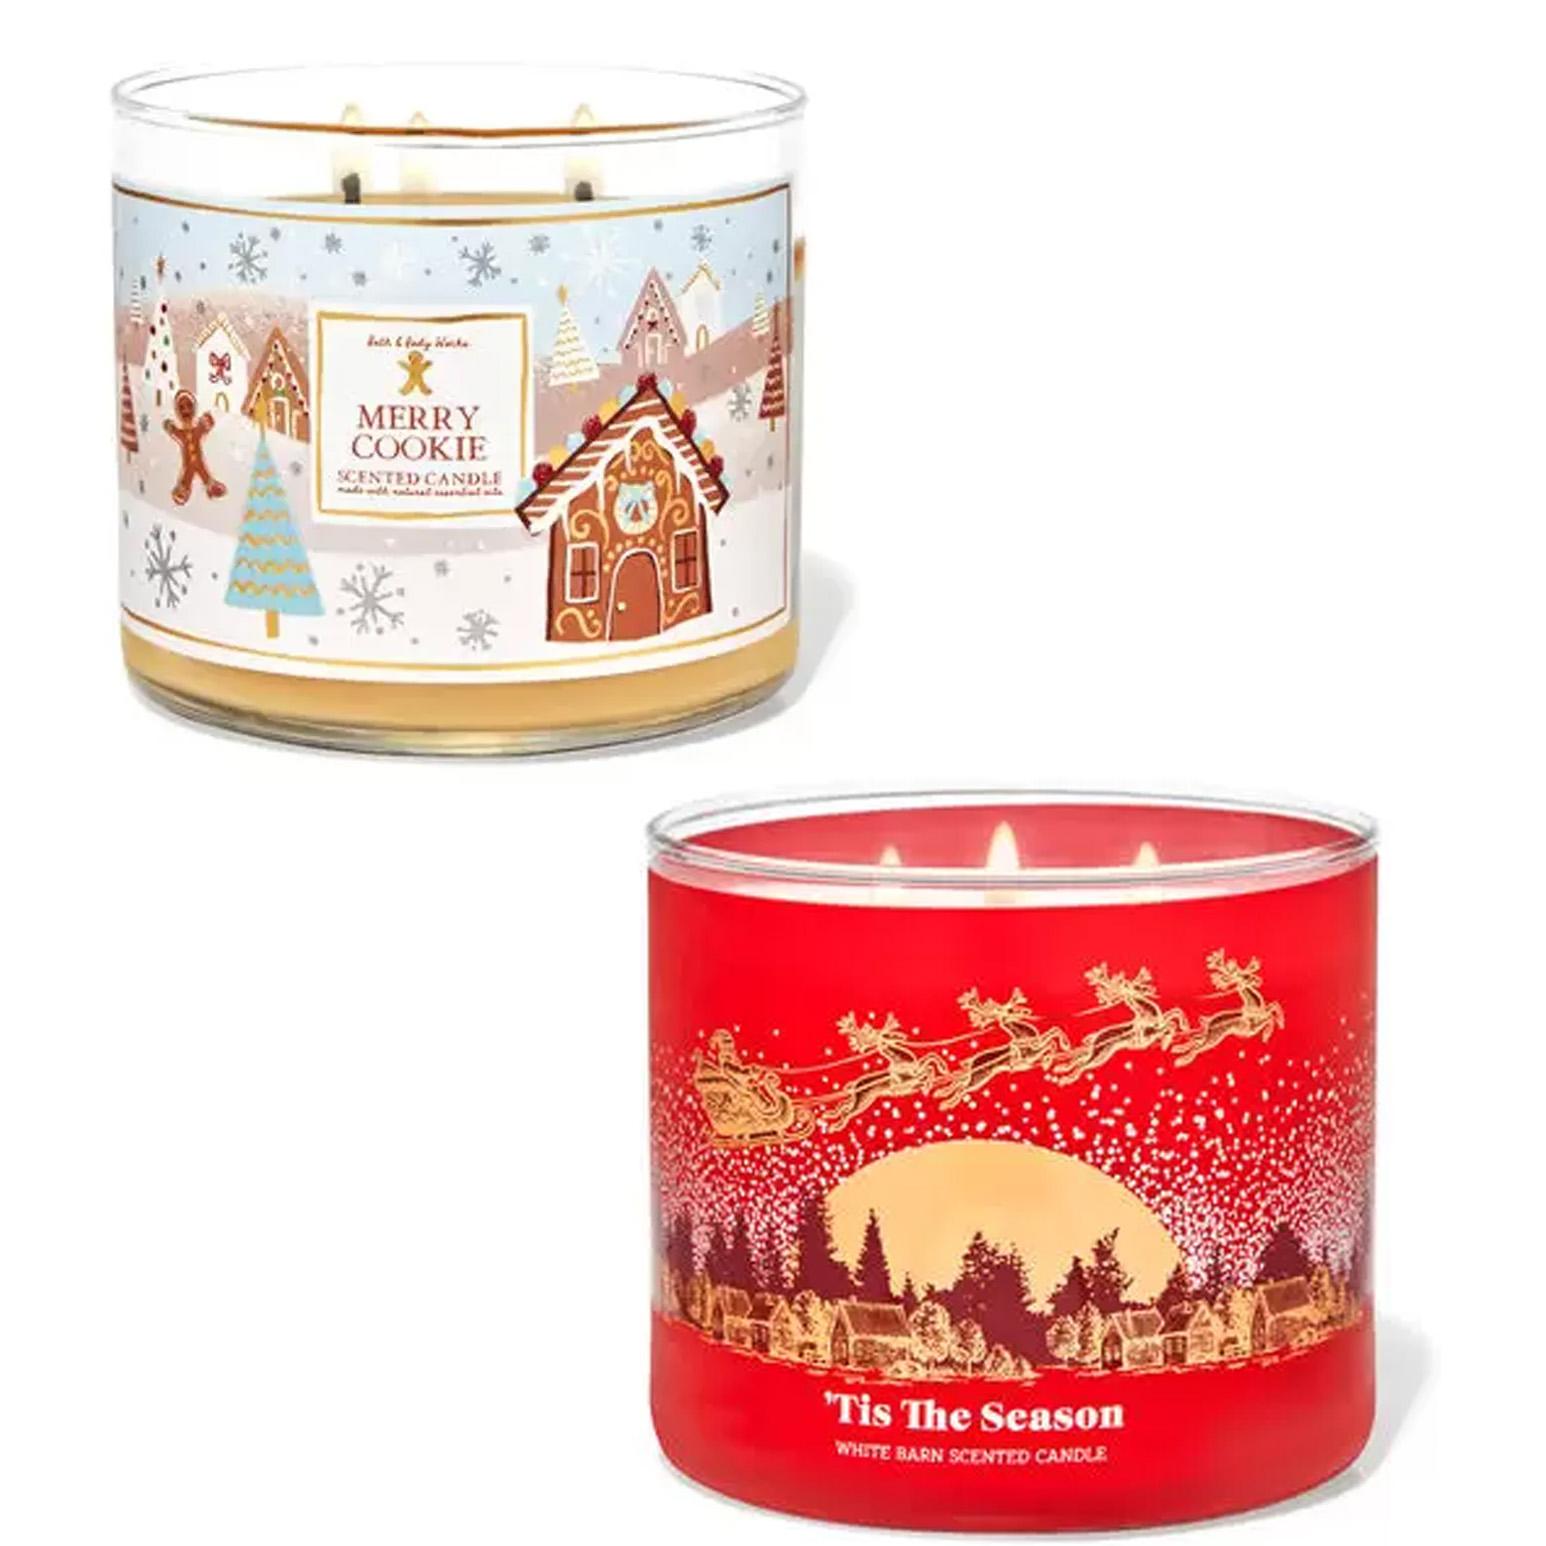 Bath and Body Works 3-Wick Candles Buy One Get One Free